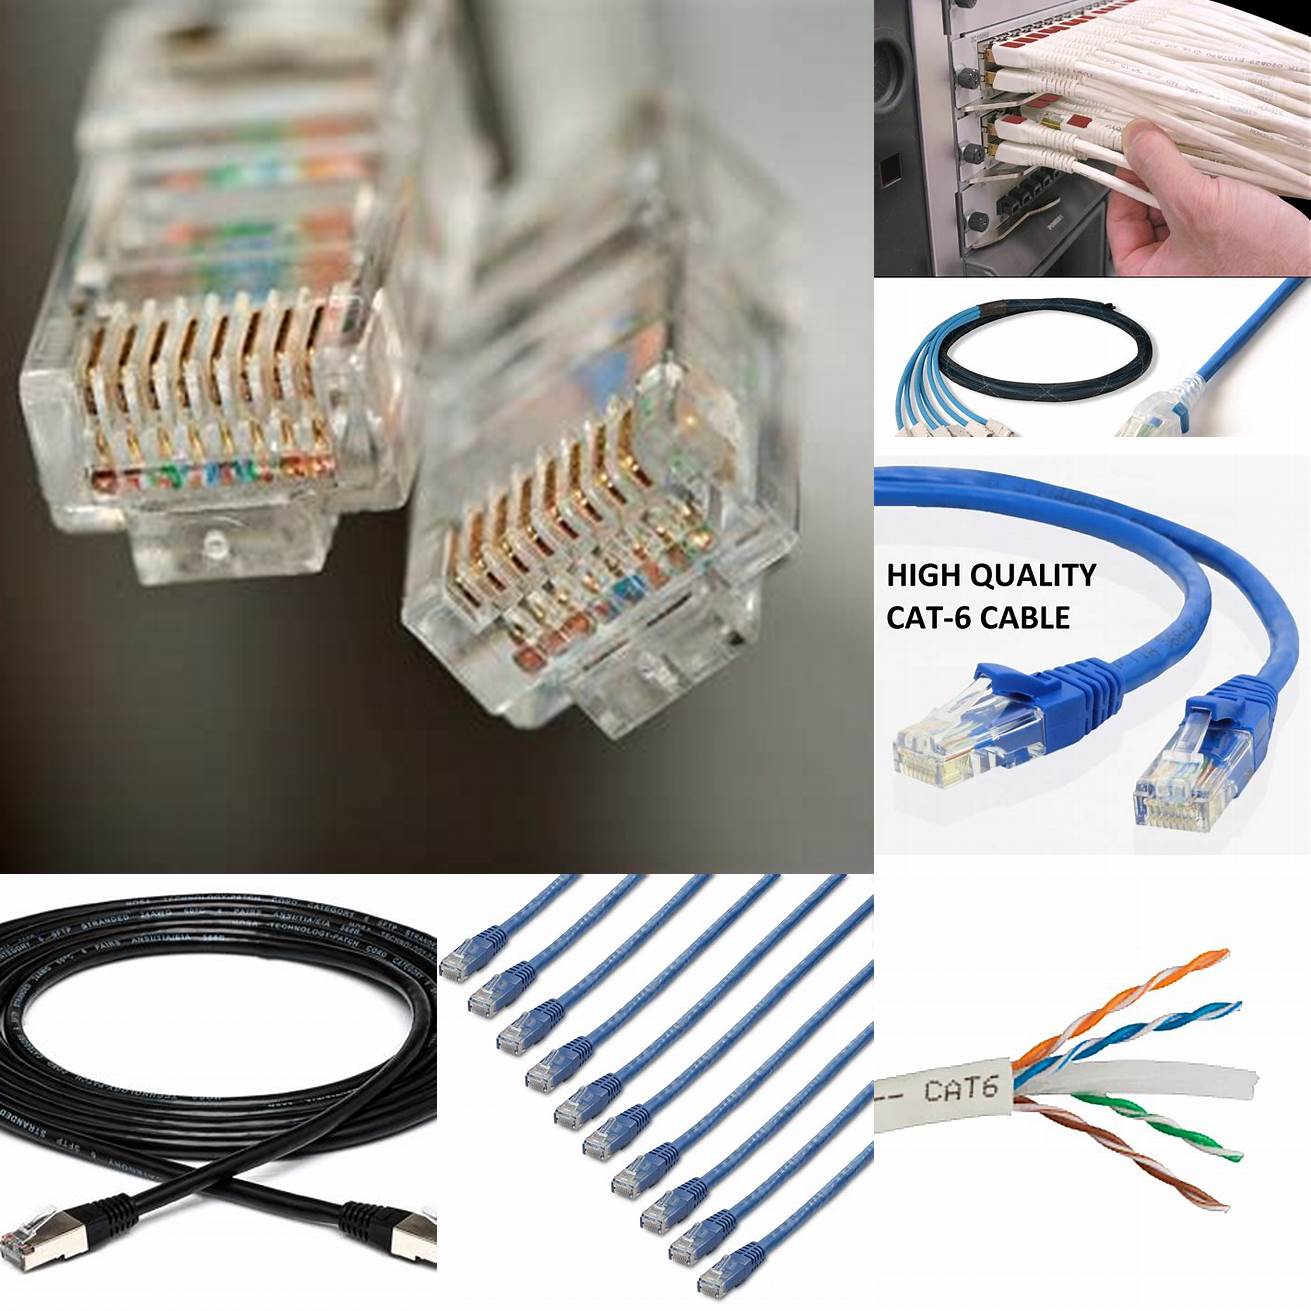 Use high-quality Cat 6 cable that meets industry standards